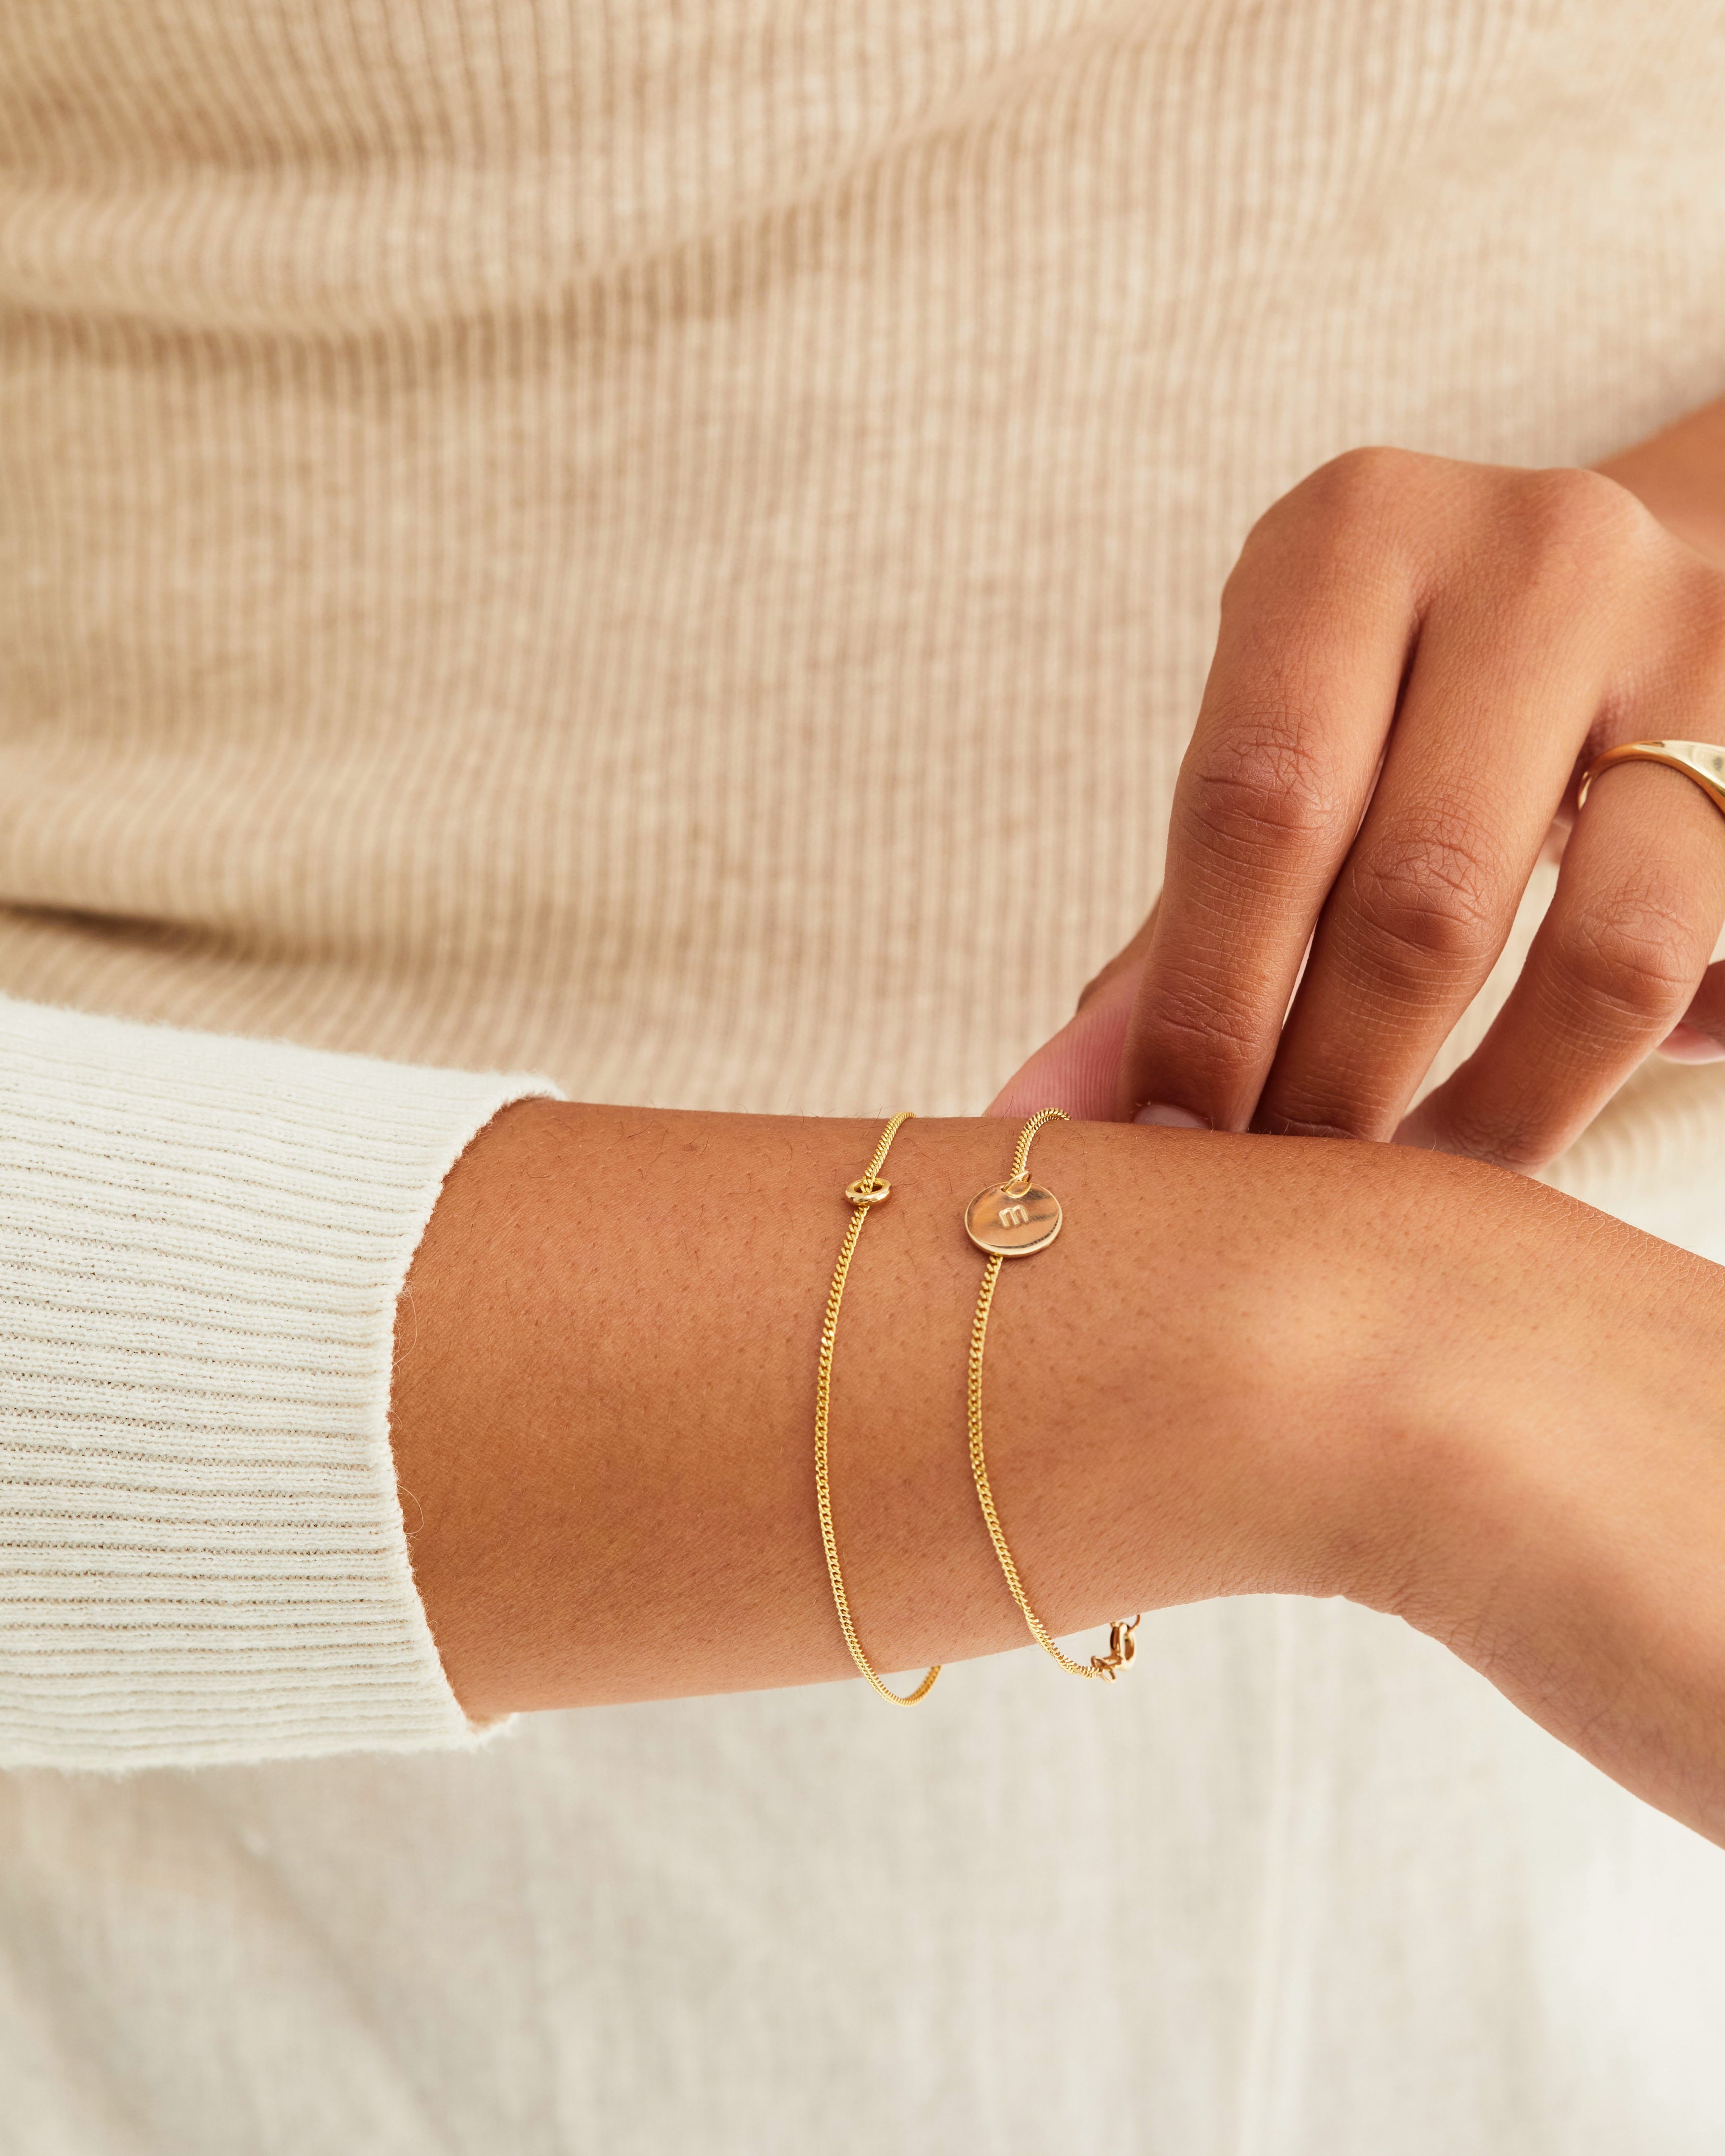 A woman wearing the Aether Charm Bracelet | Birthstone and the Mini Initial Bracelet, both in yellow gold.